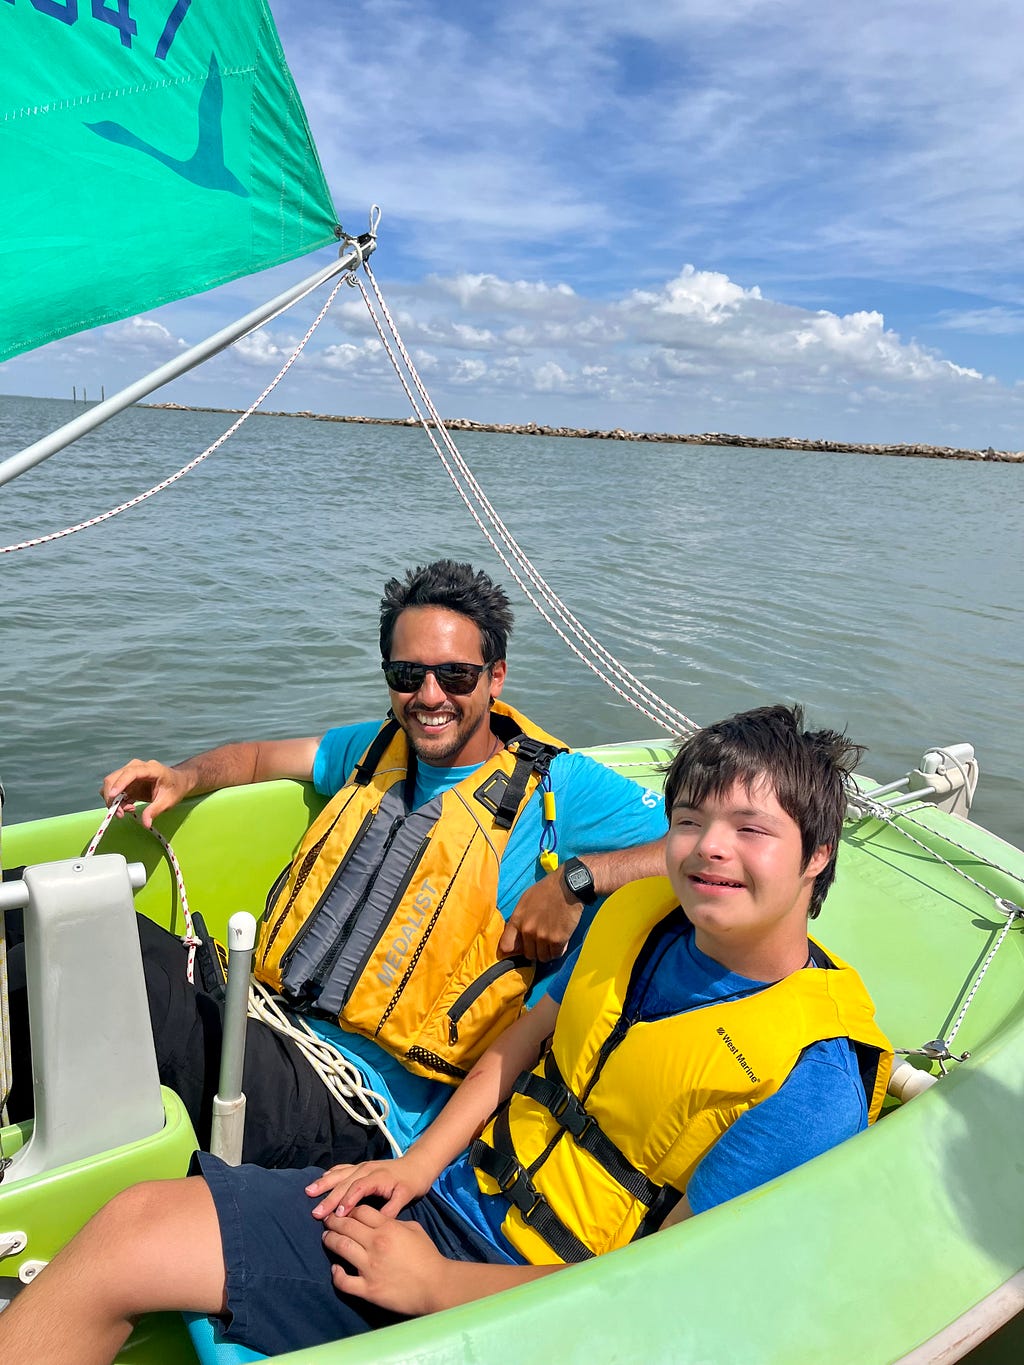 Word and camper smile at the camera while they are sailing in the sailboat in the bay.